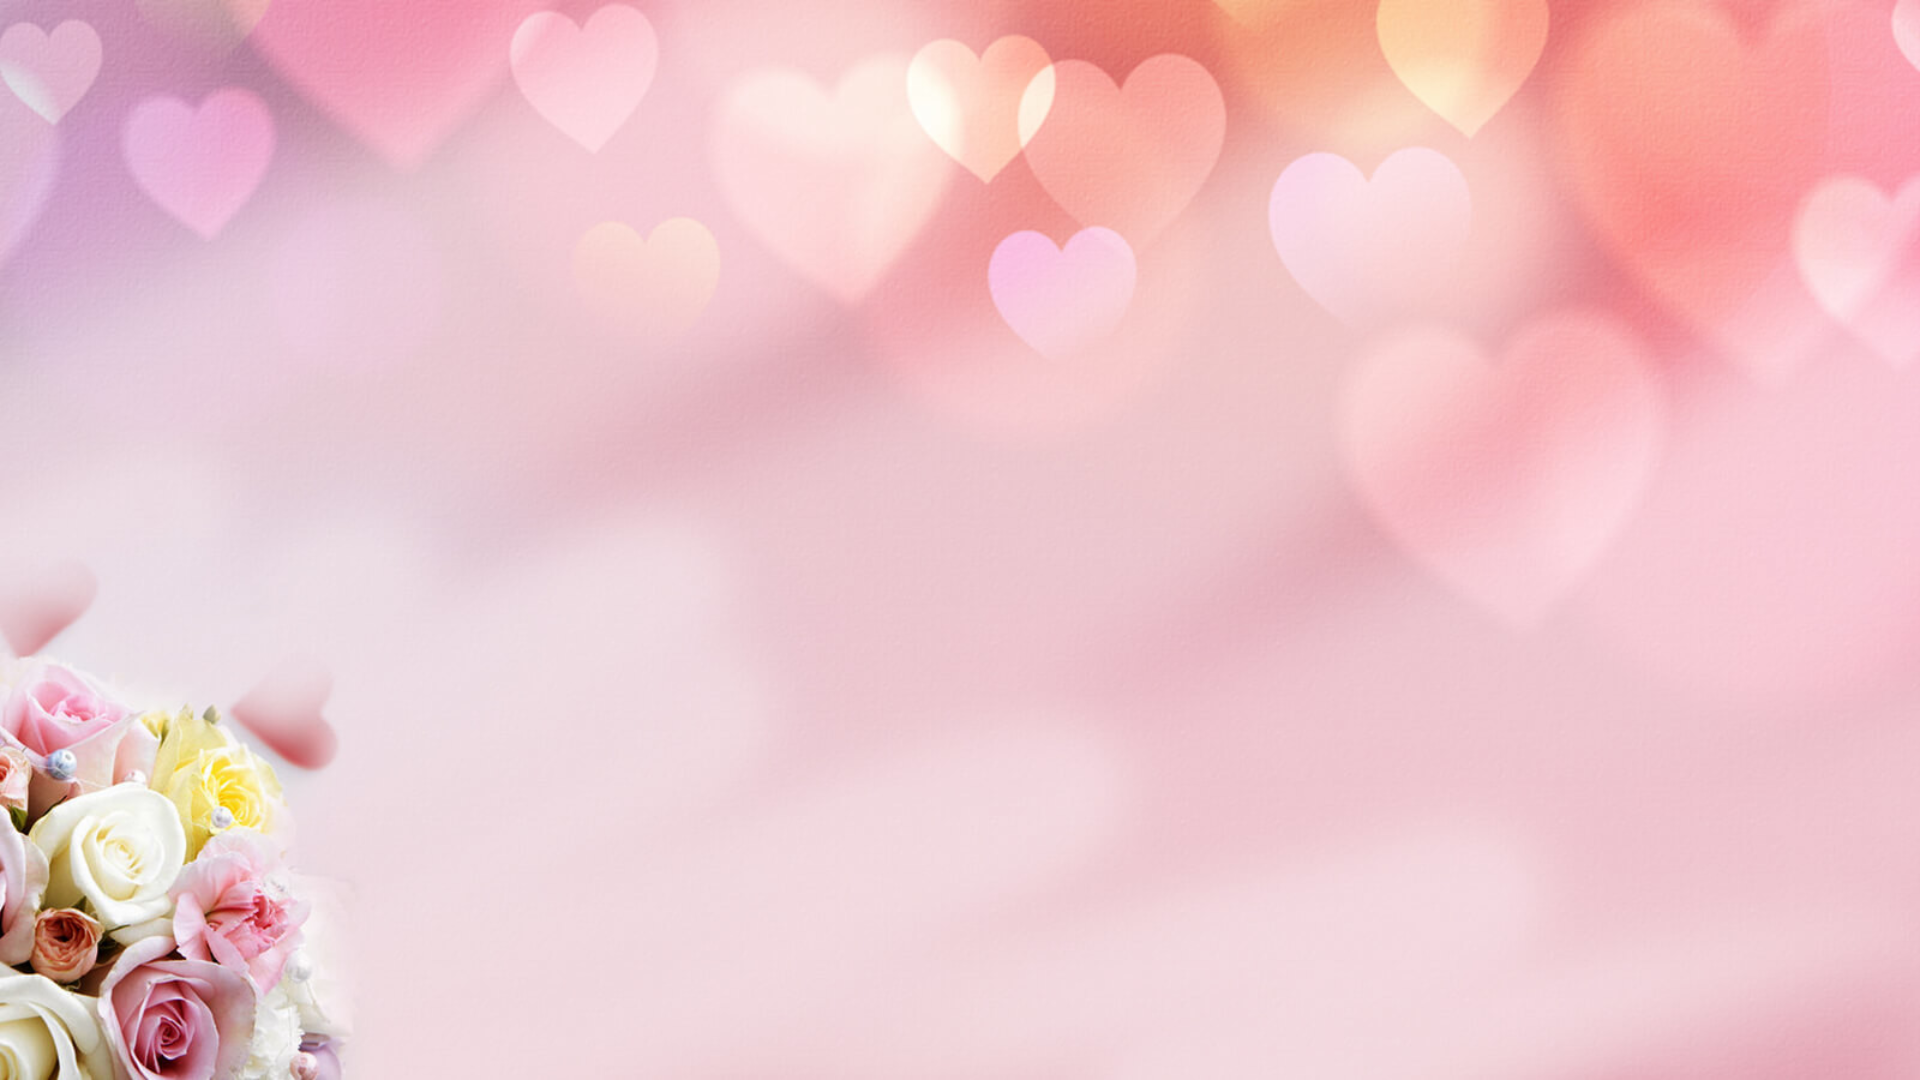 4370023 Love Background Stock Photos and Images  123RF